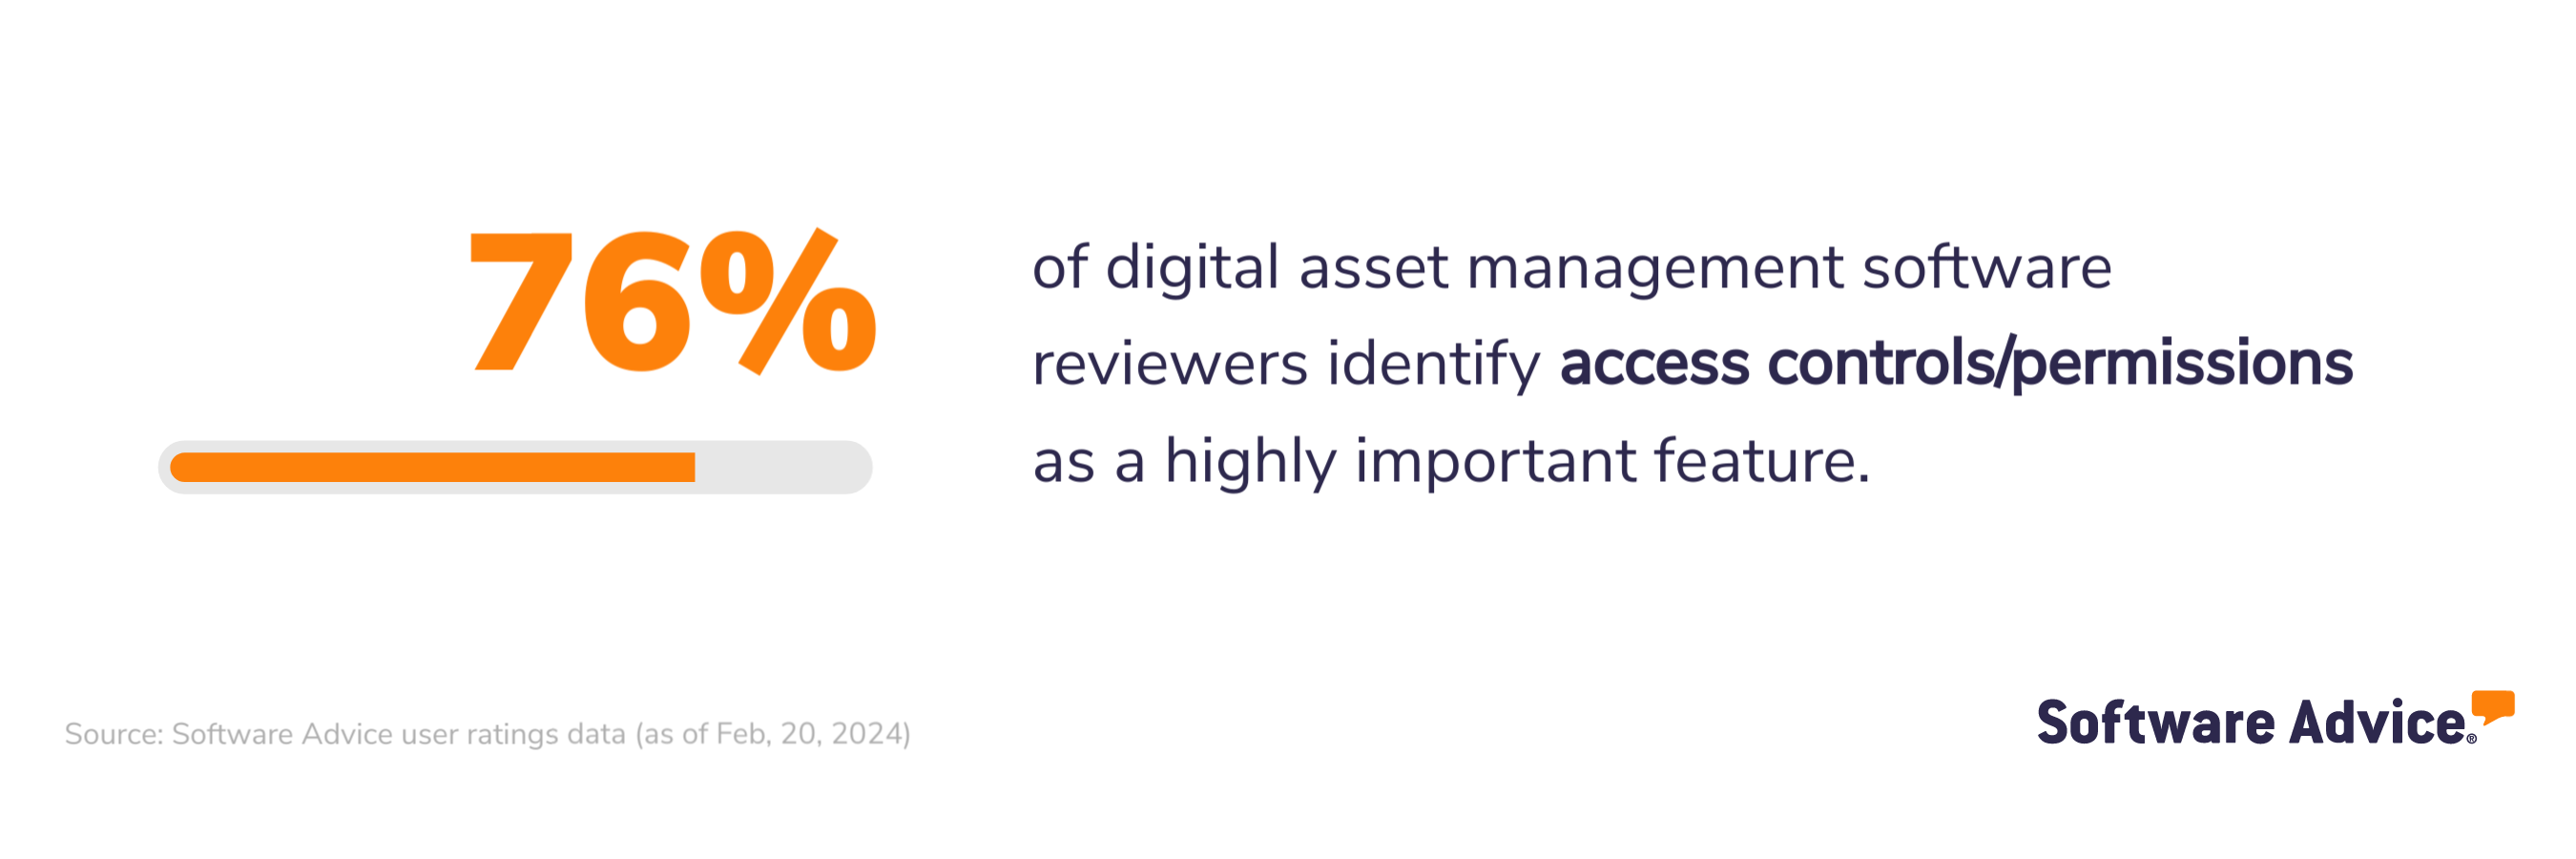 76% of digital asset management software reviewers identify access controls/permissions as a highly important feature.